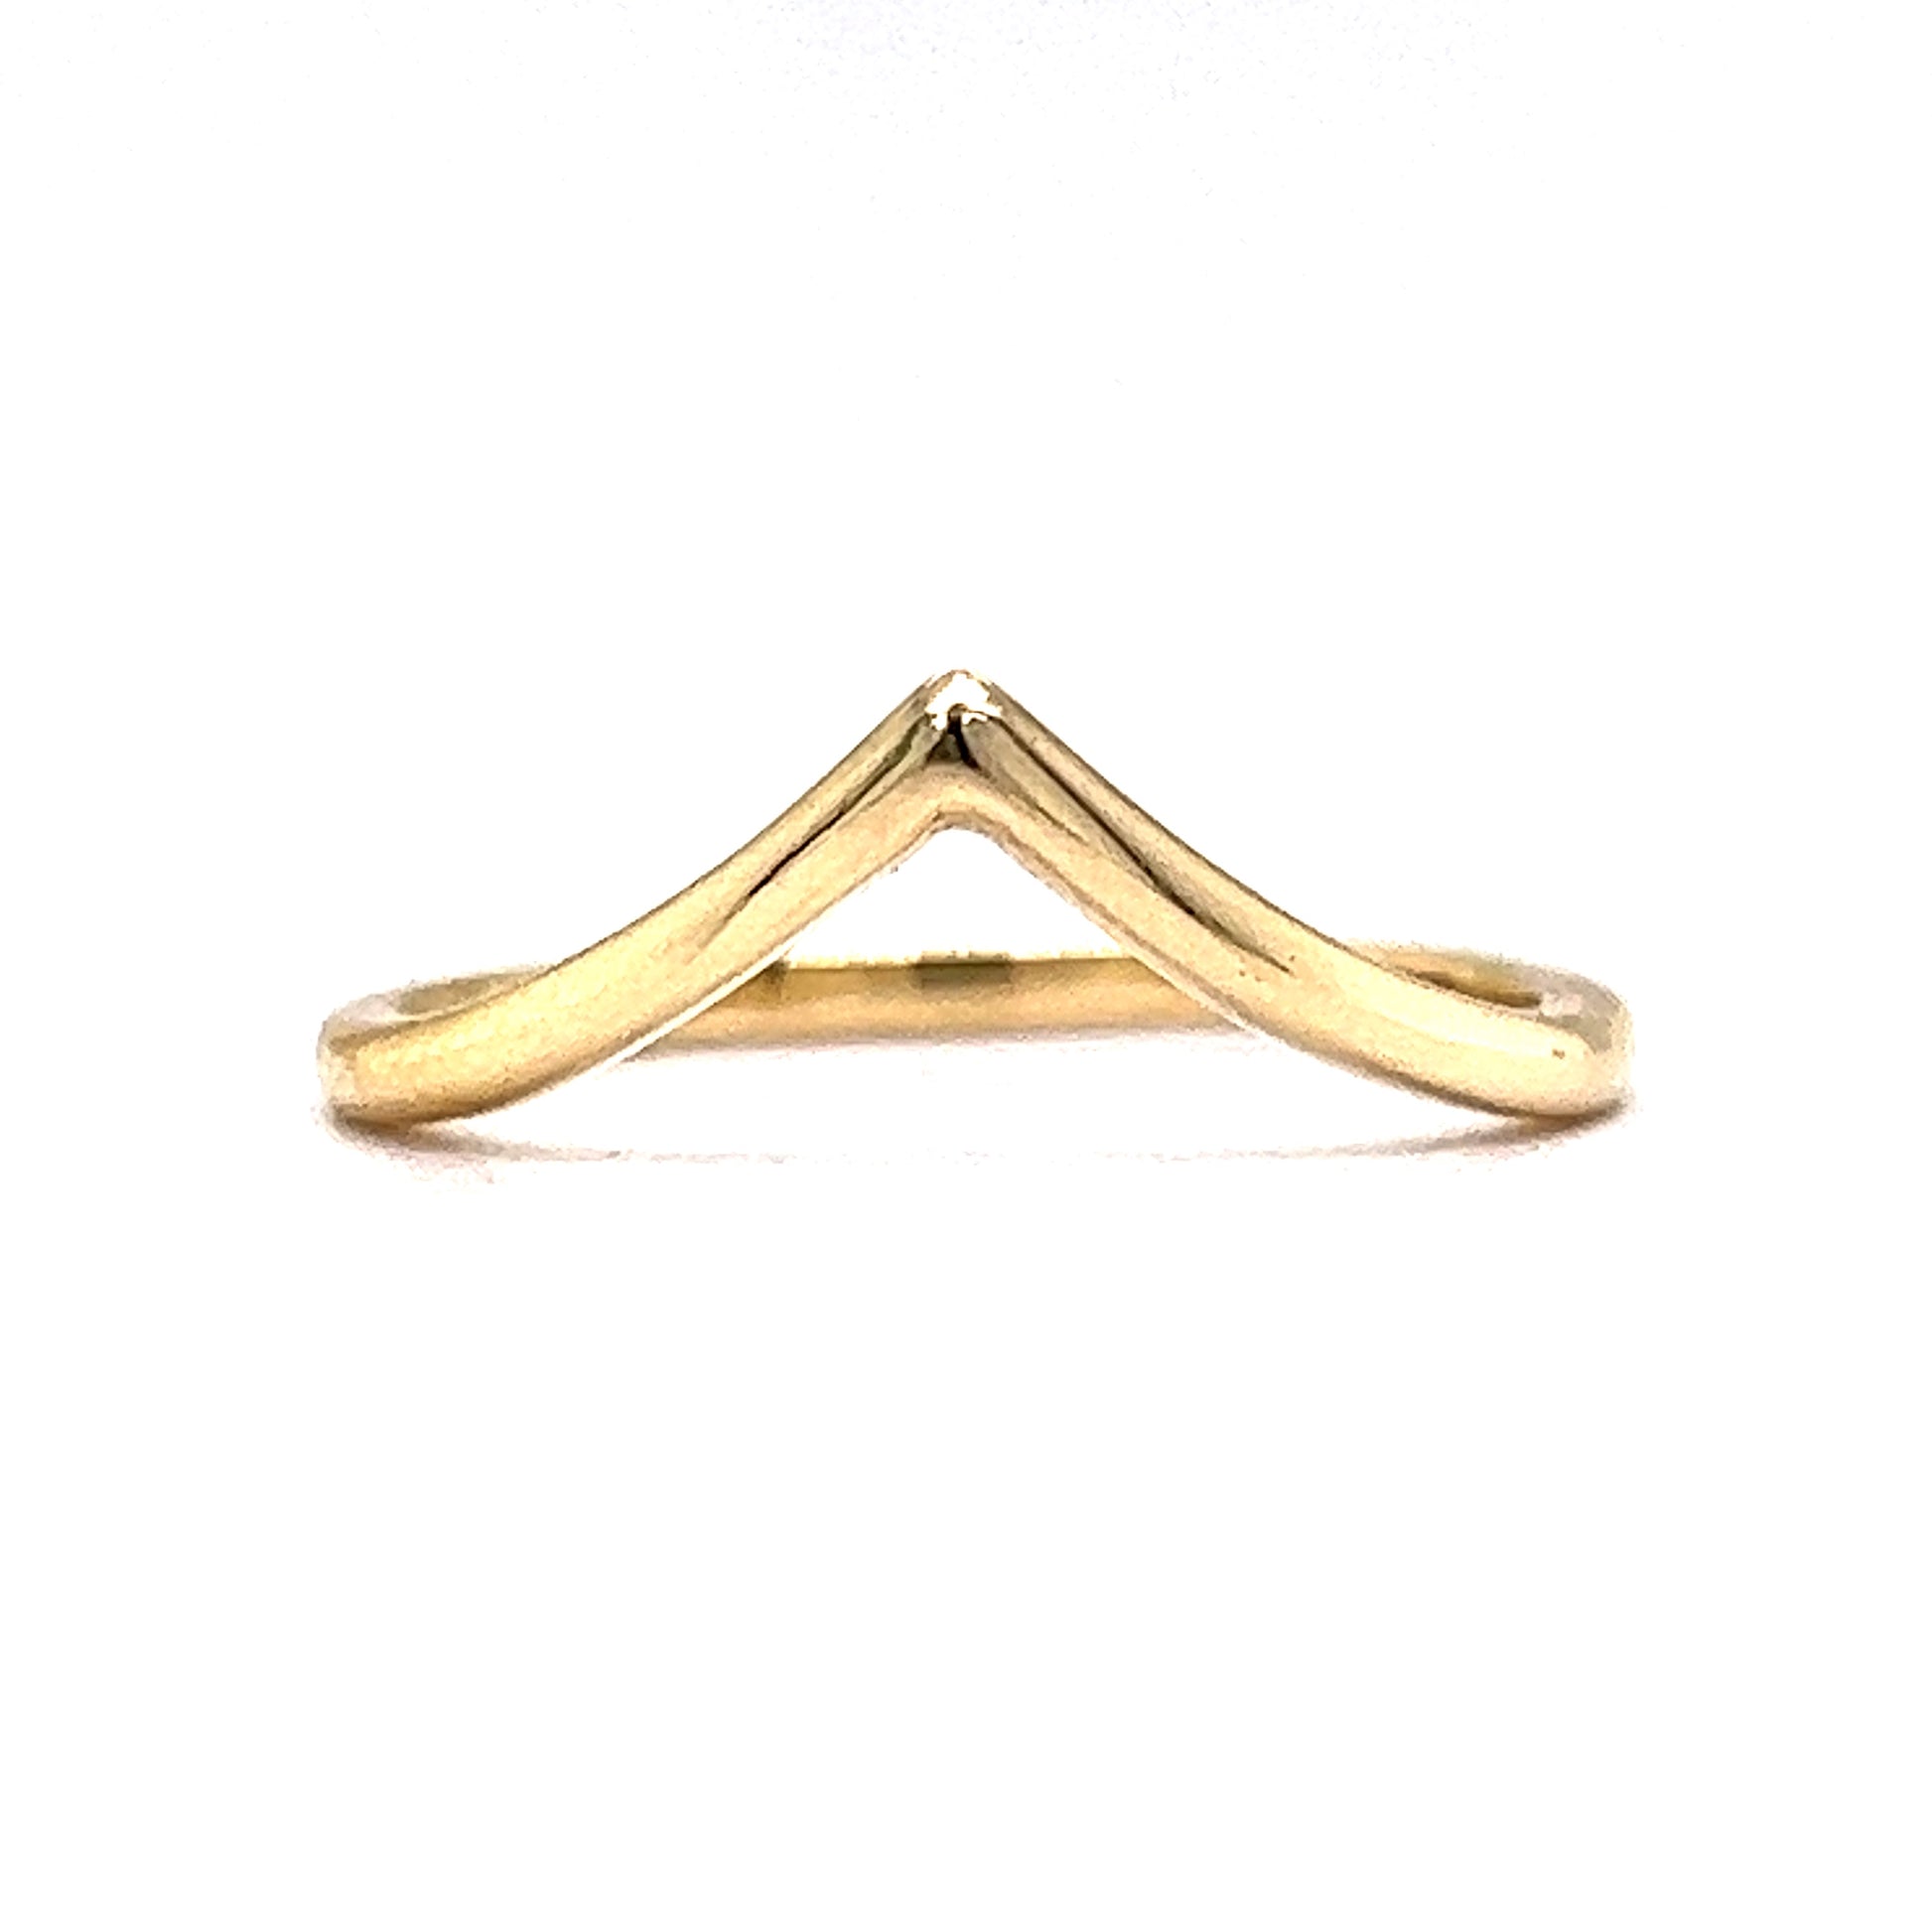 Thin V Shaped Wedding Band in 14k Yellow GoldComposition: 14 Karat Yellow GoldRing Size: 7.5Total Gram Weight: 1.8 gInscription: 14k